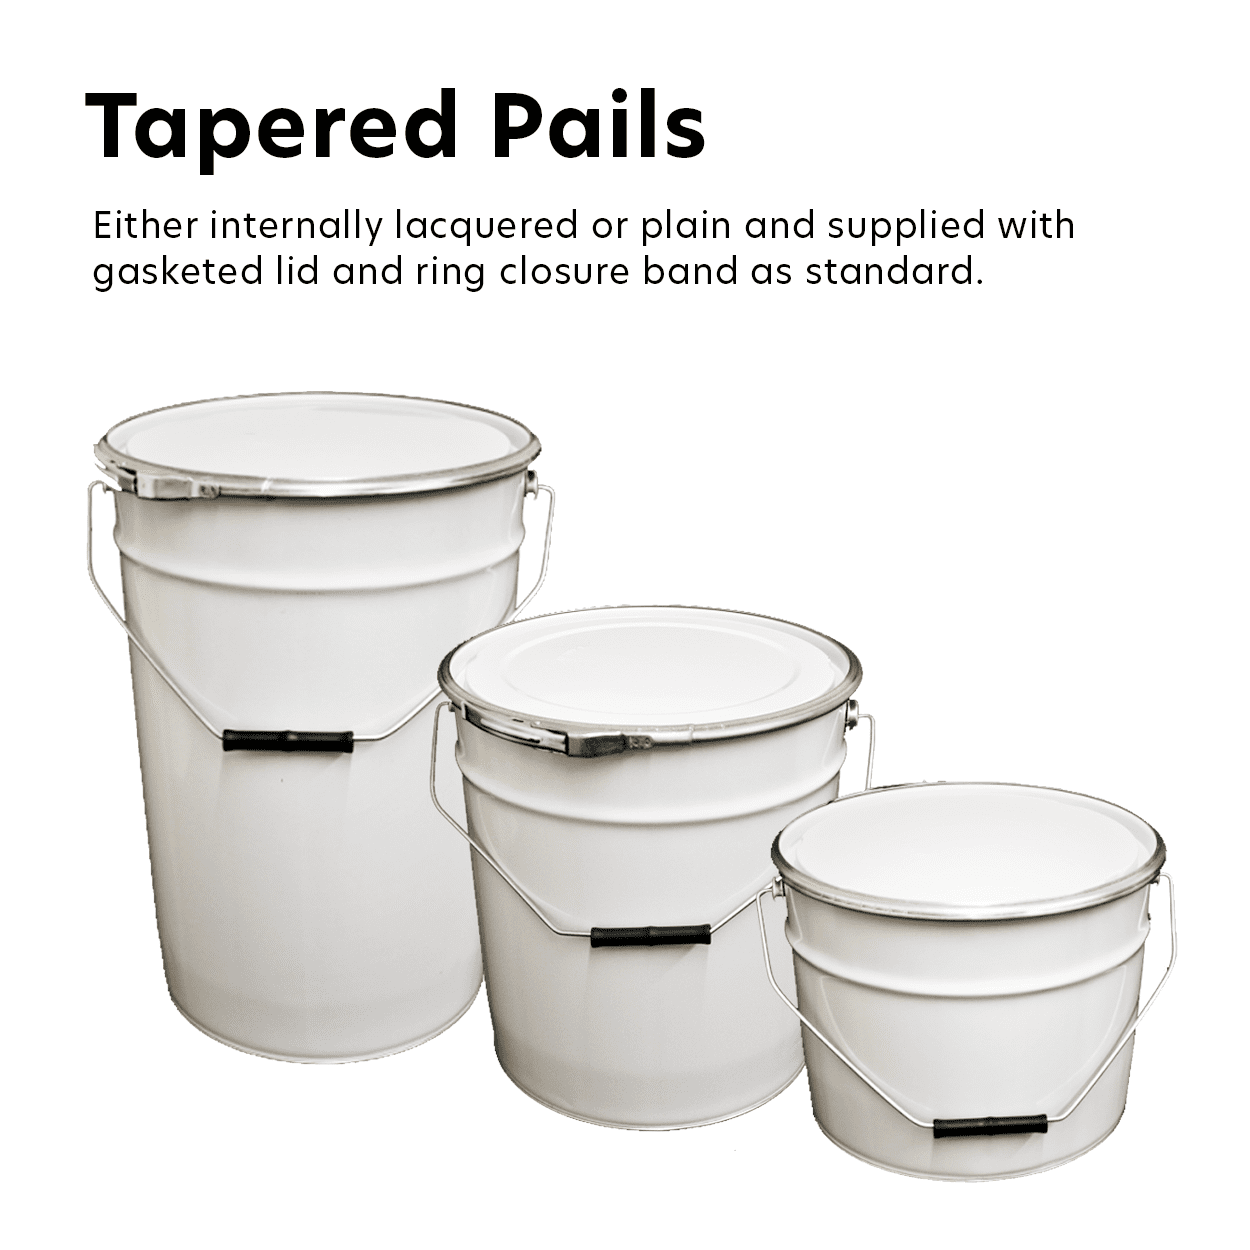 Tapered Pails